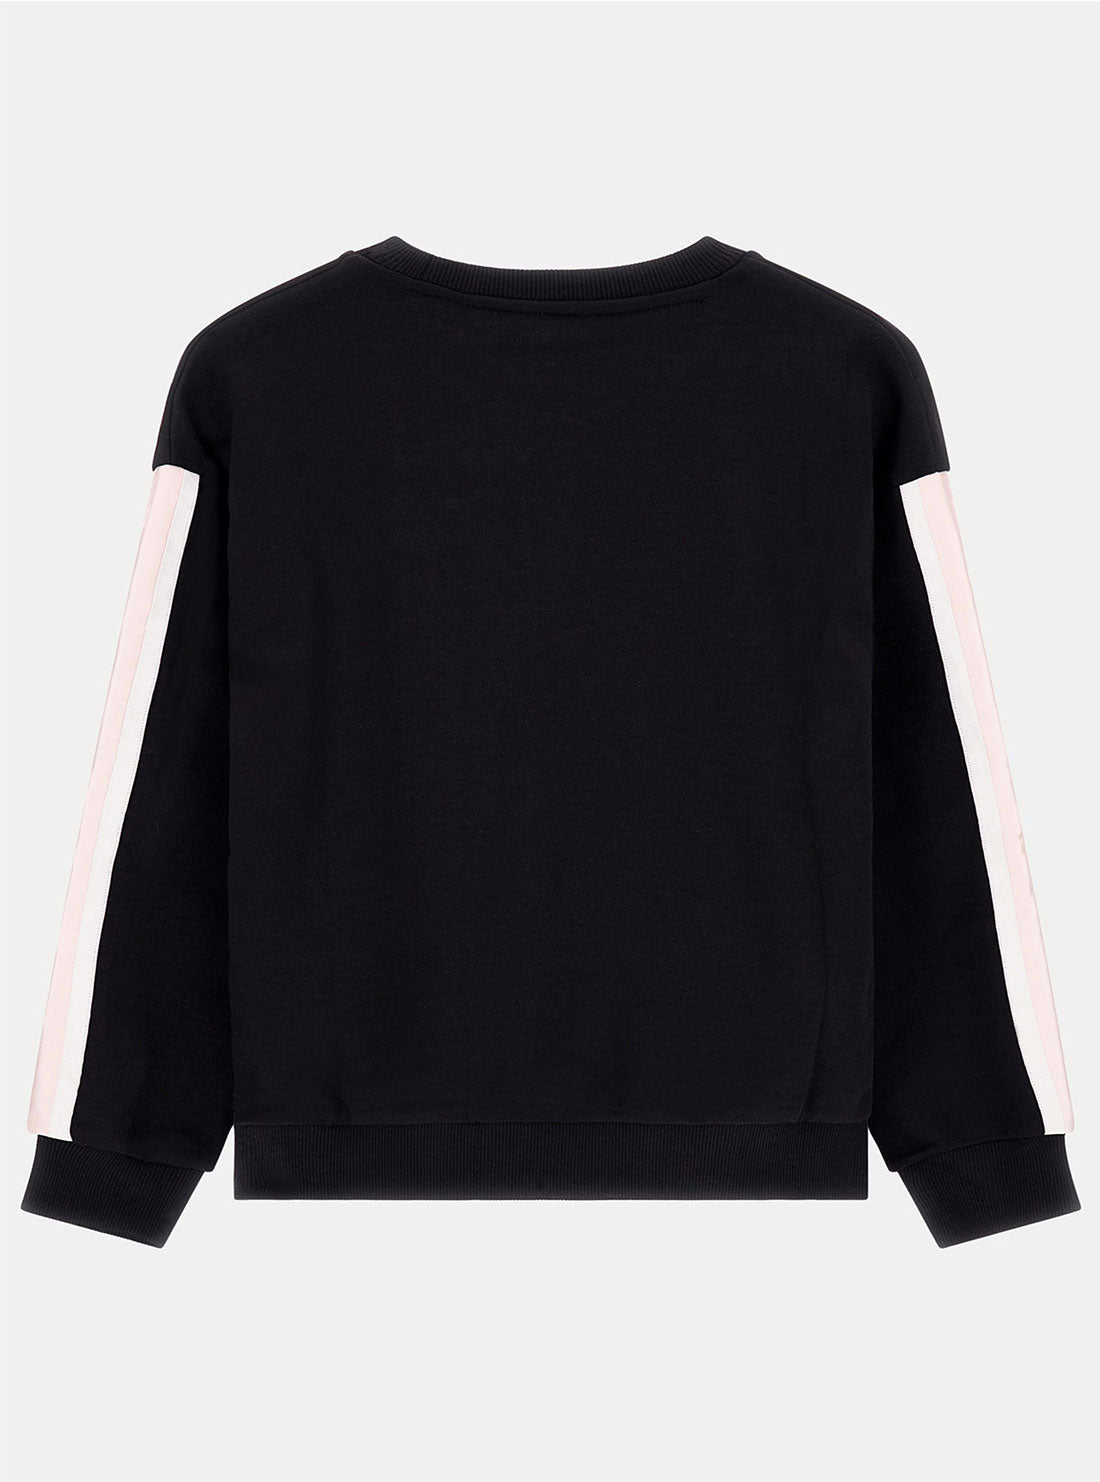 GUESS Black Long Sleeve Jumper (7-16) back view